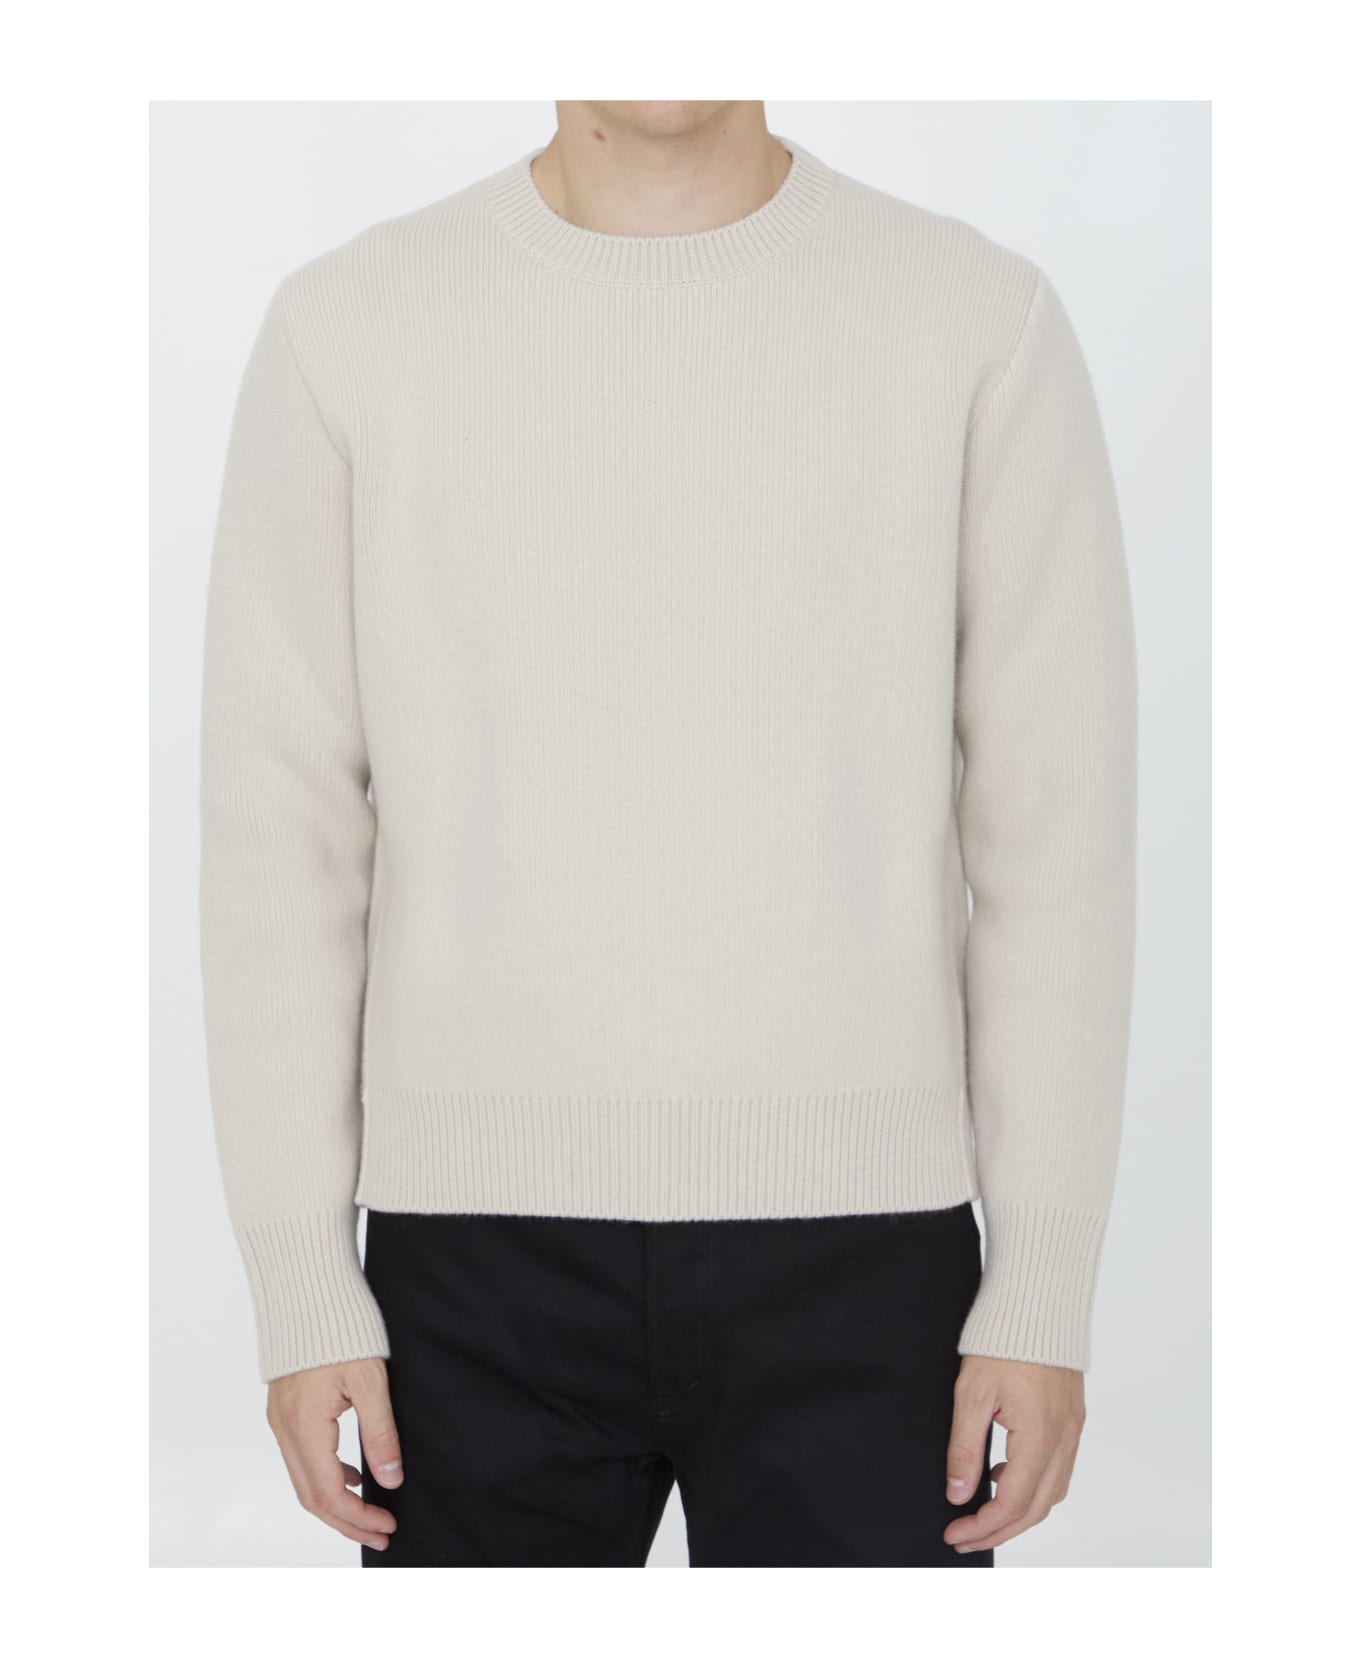 Lanvin Wool And Cashmere Sweater - CREAM